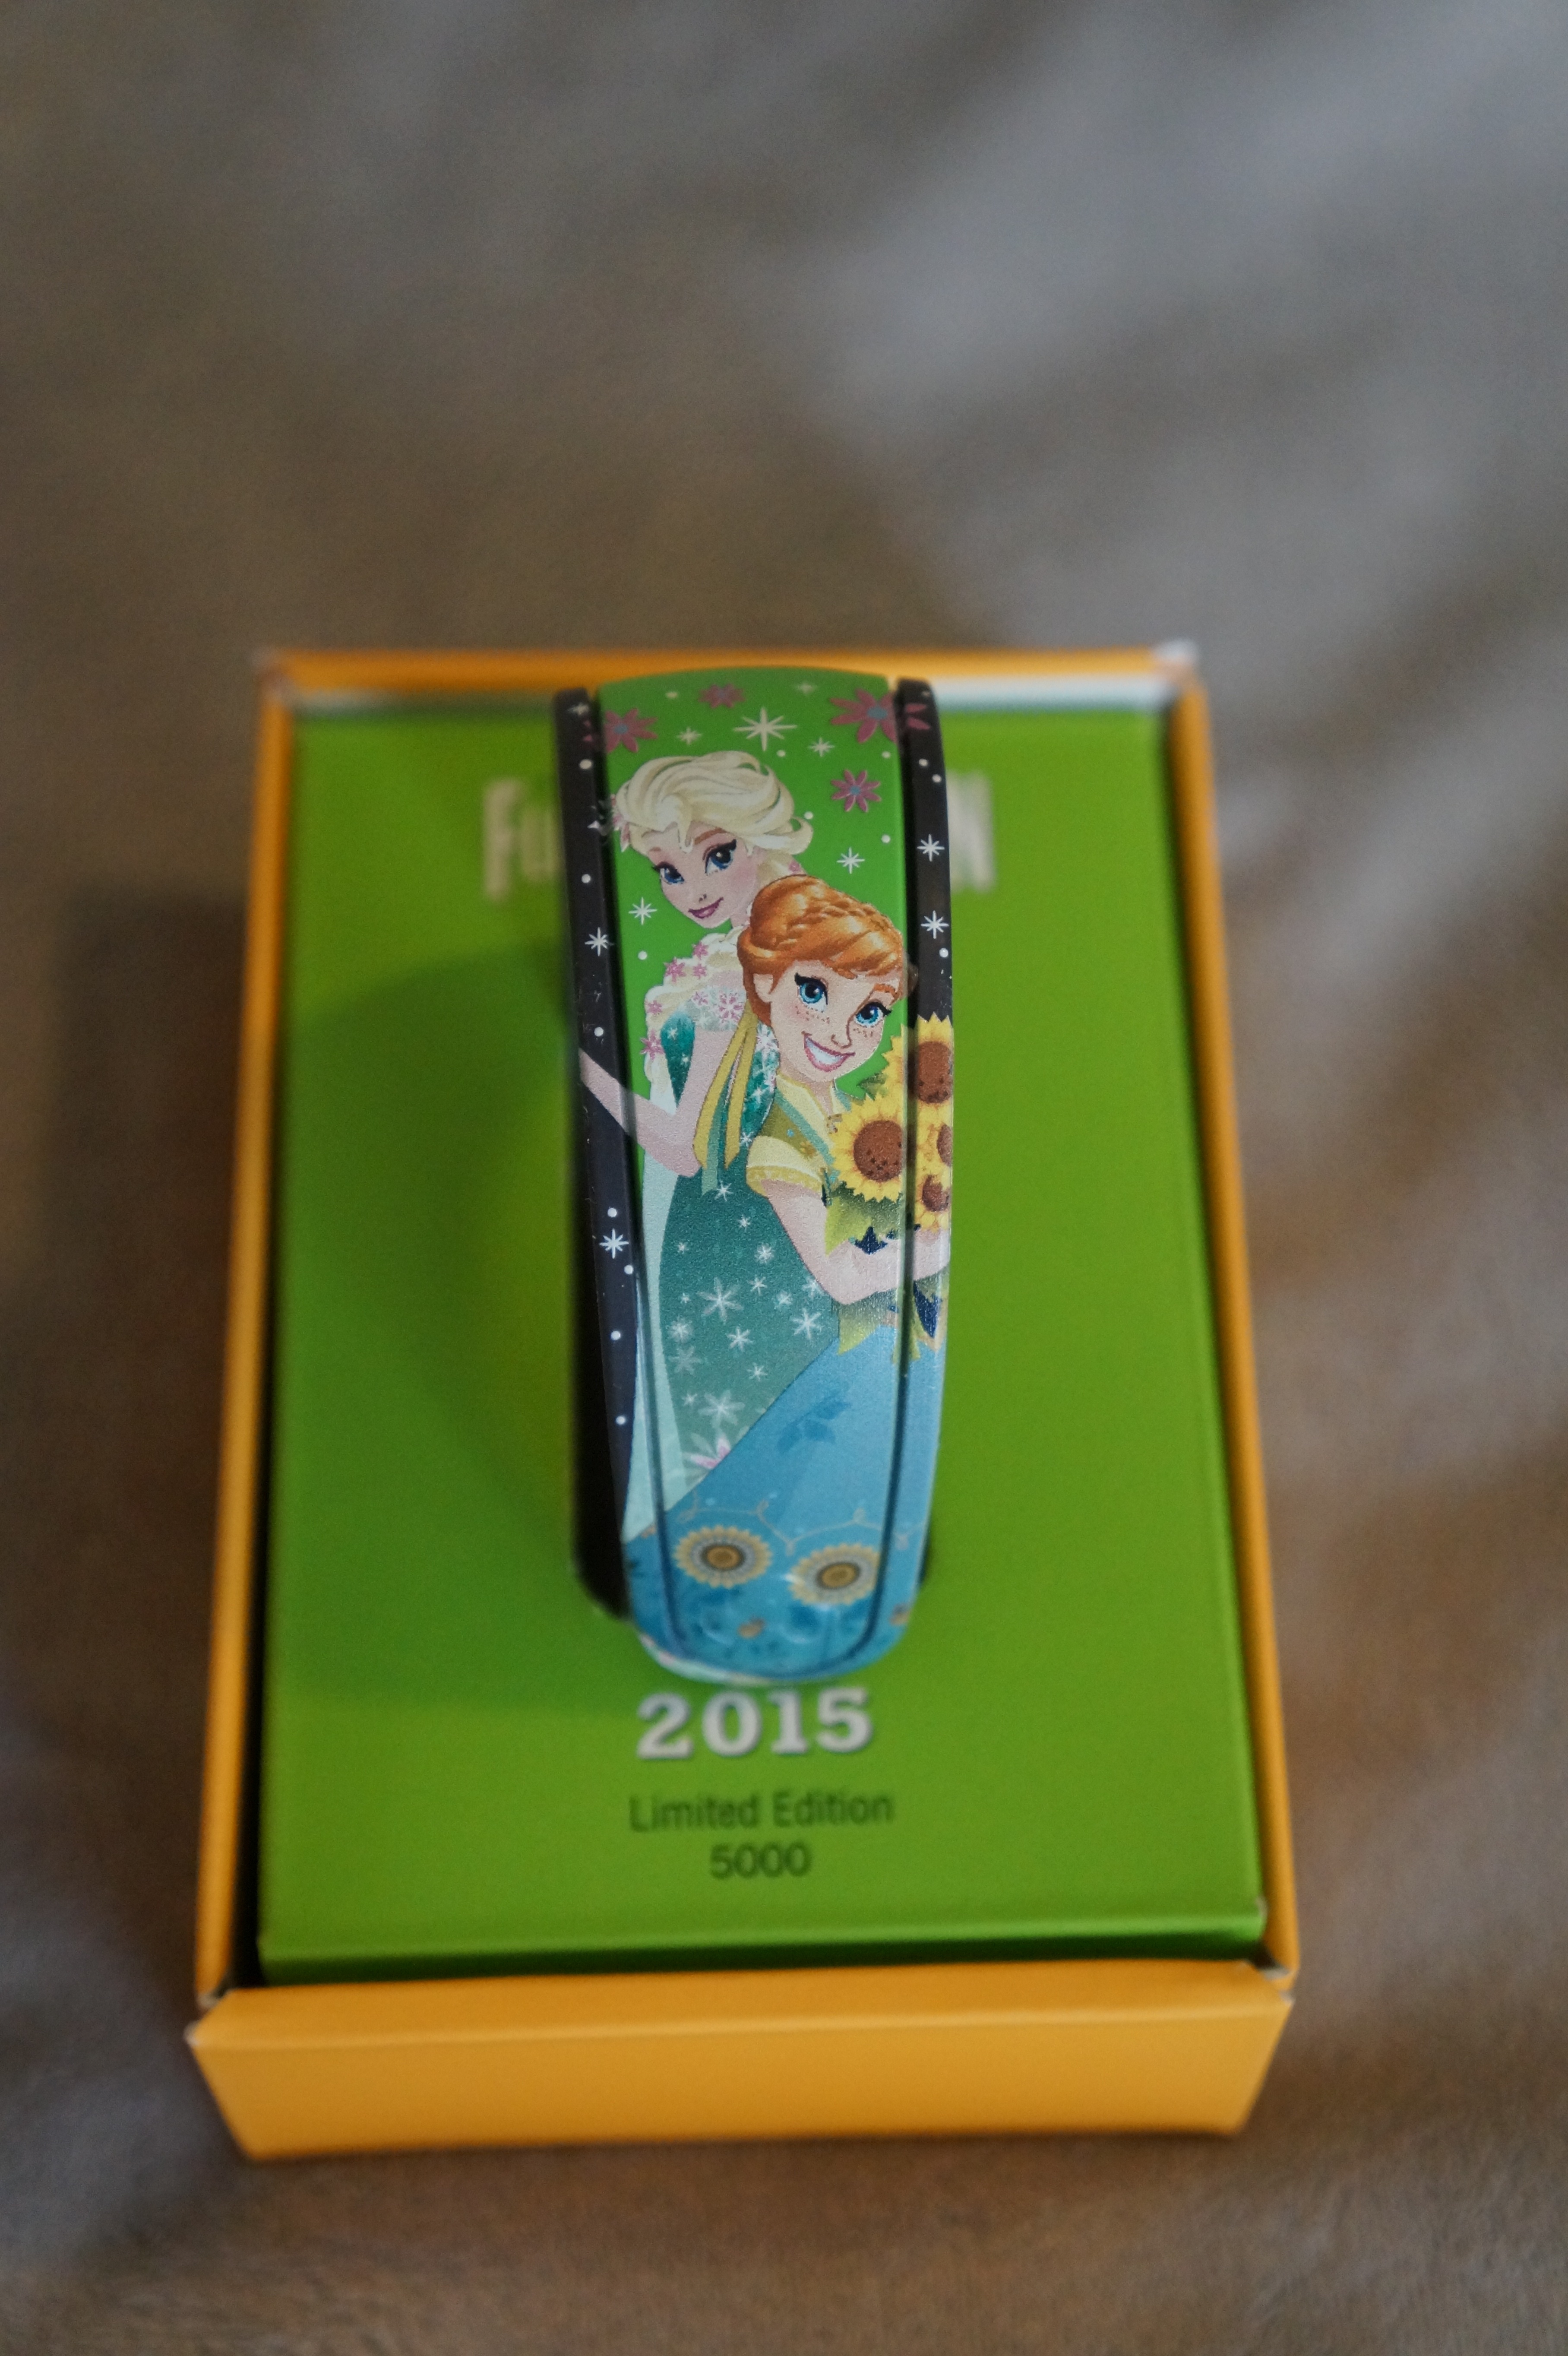 limited-edition flower and garden festival magicband (with video